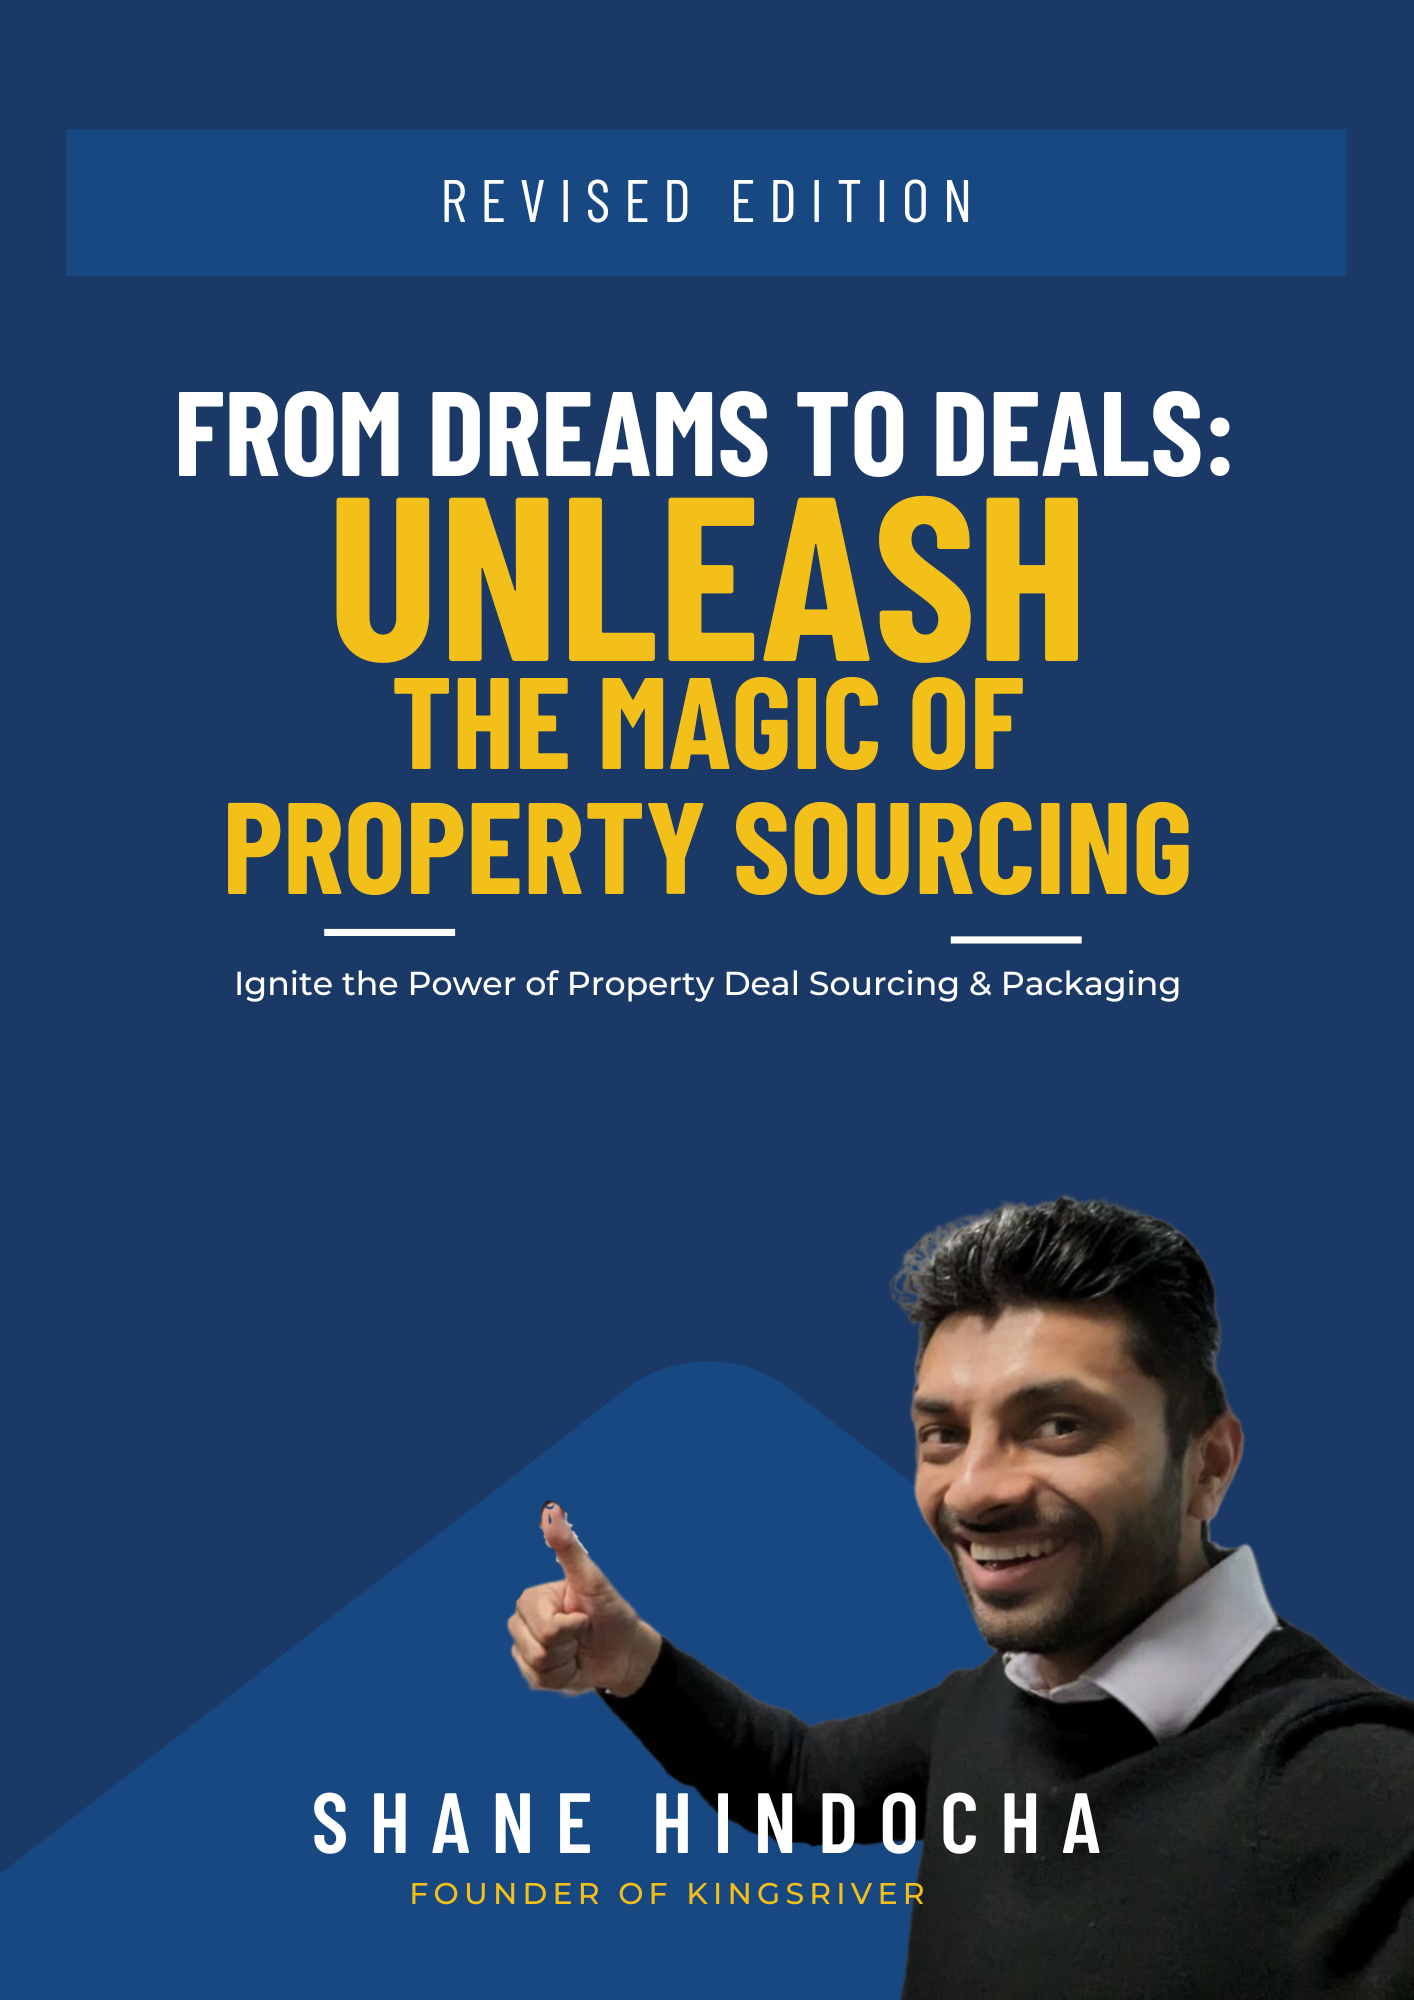 From Dreams To Deals: Unleash The Magic Of Property Sourcing